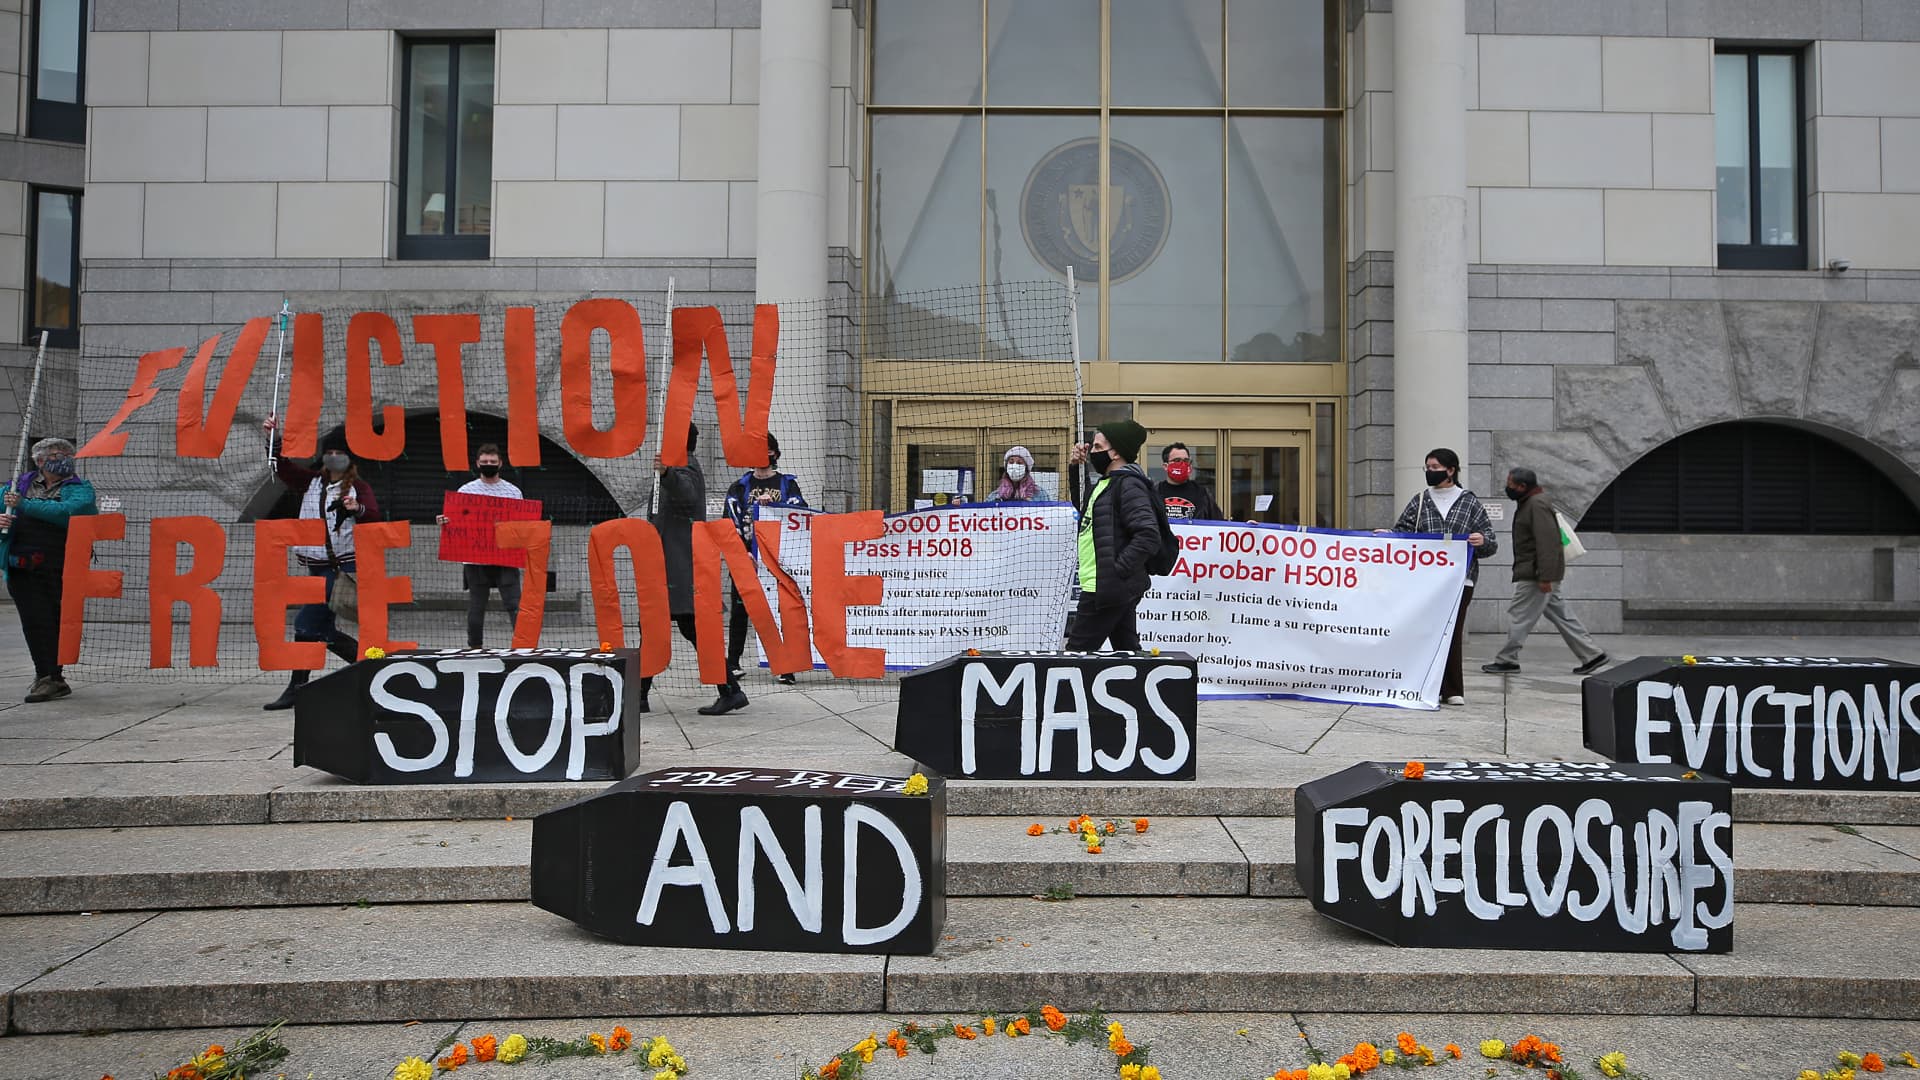 Demonstrators display signs calling for an end to evictions and foreclosures during a rally at Boston Housing Court outside the Edward W. Brooke Courthouse on Oct. 29, 2020.